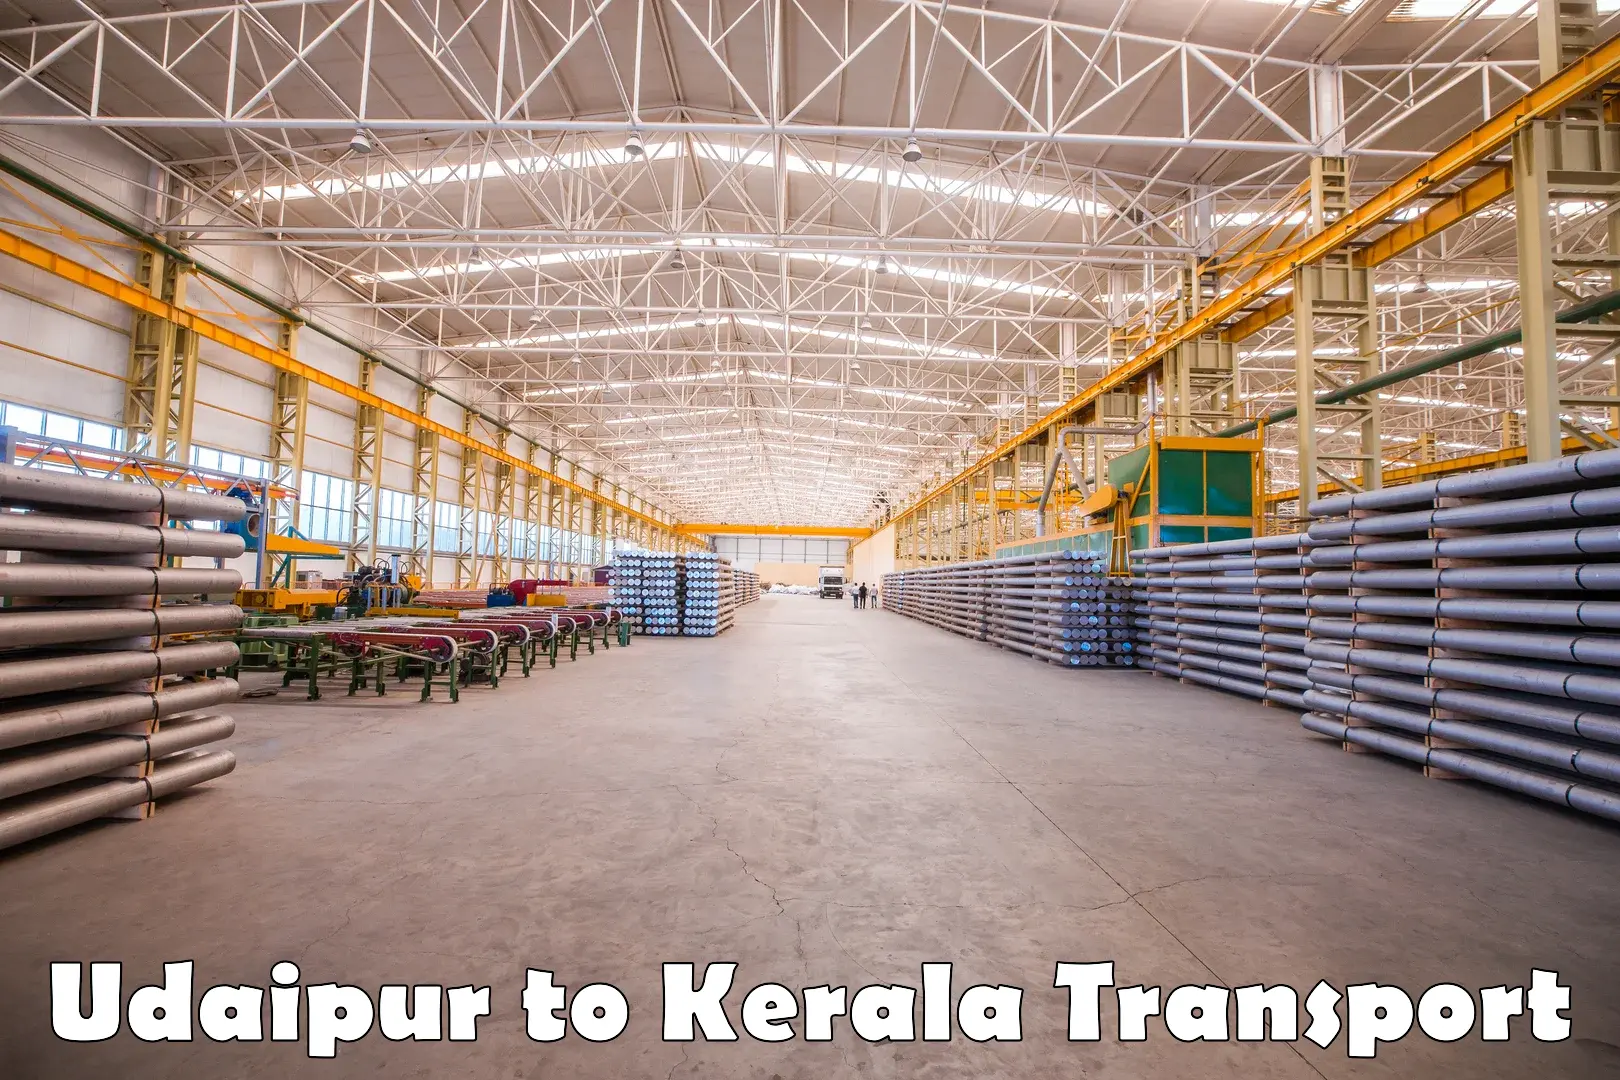 Truck transport companies in India Udaipur to Kerala